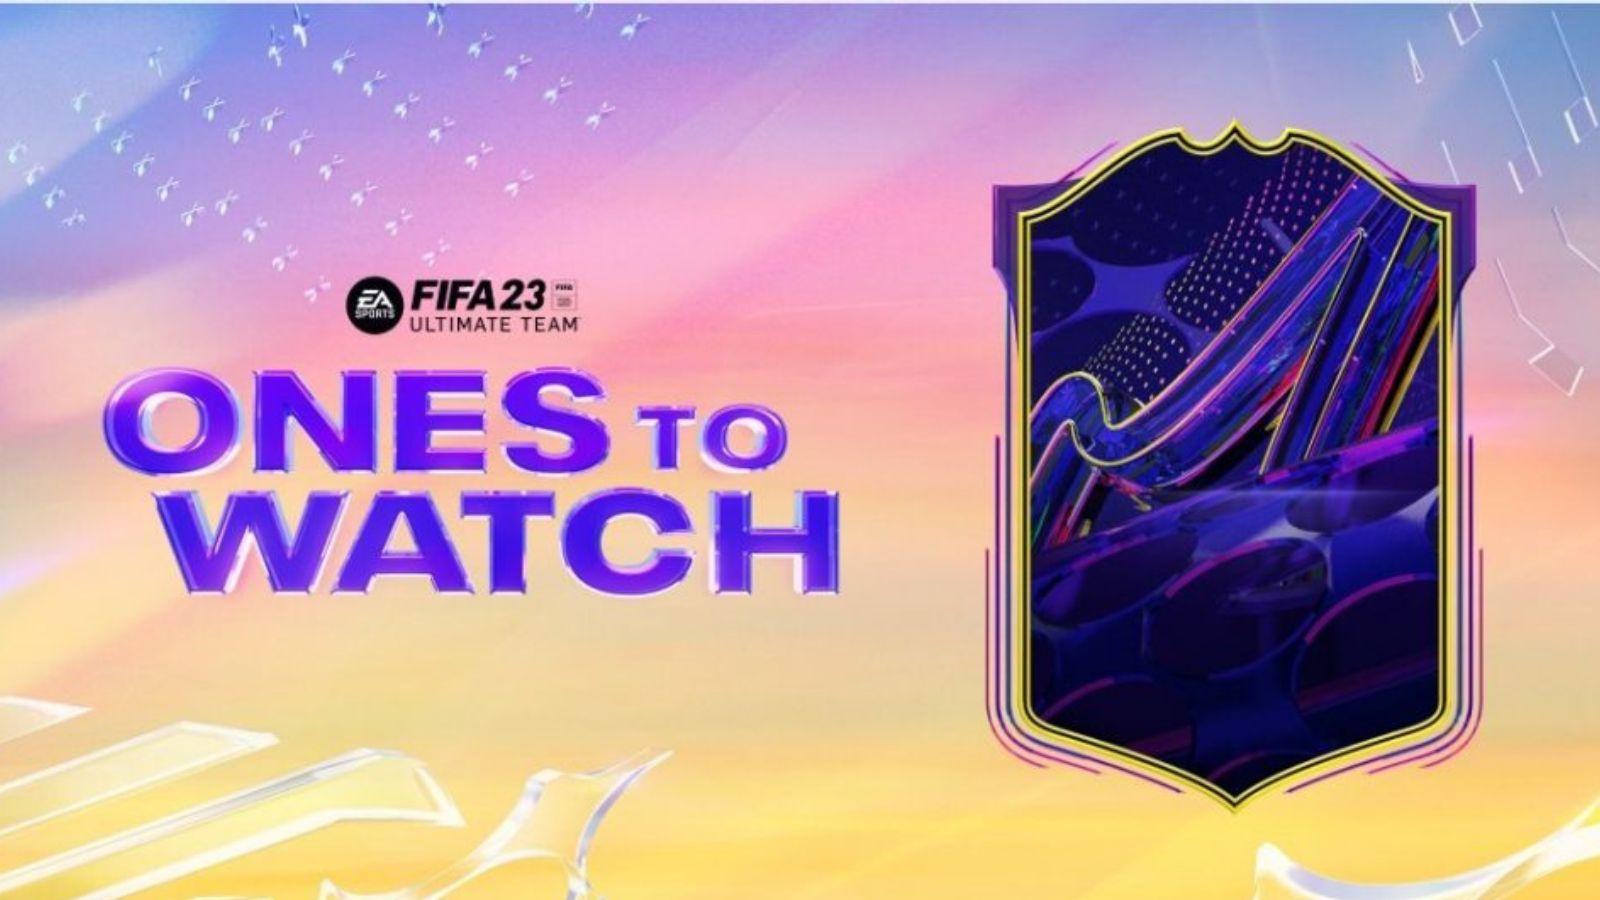 FIFA 23 Ones to Watch tracker